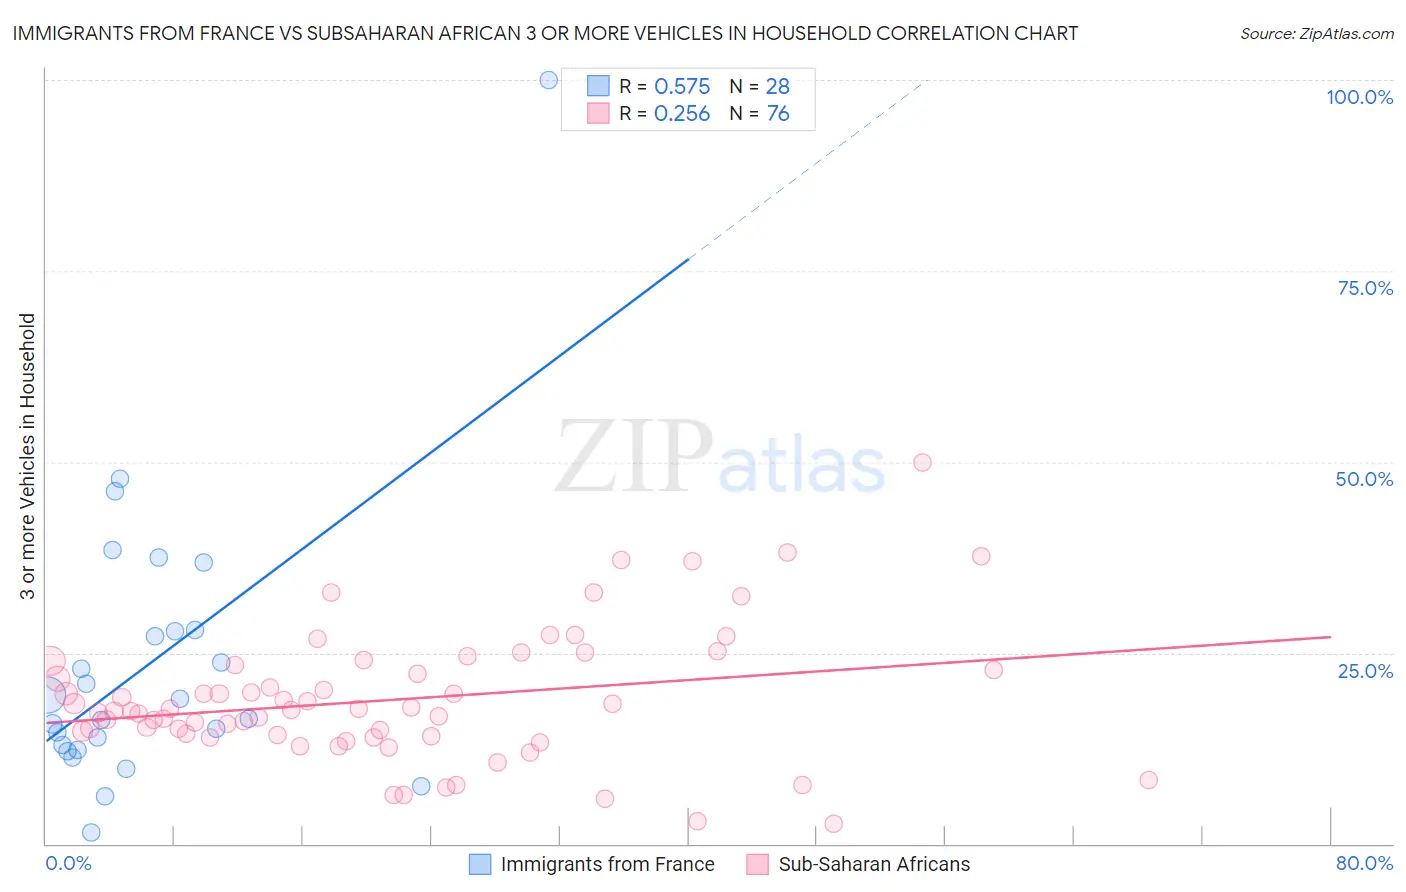 Immigrants from France vs Subsaharan African 3 or more Vehicles in Household